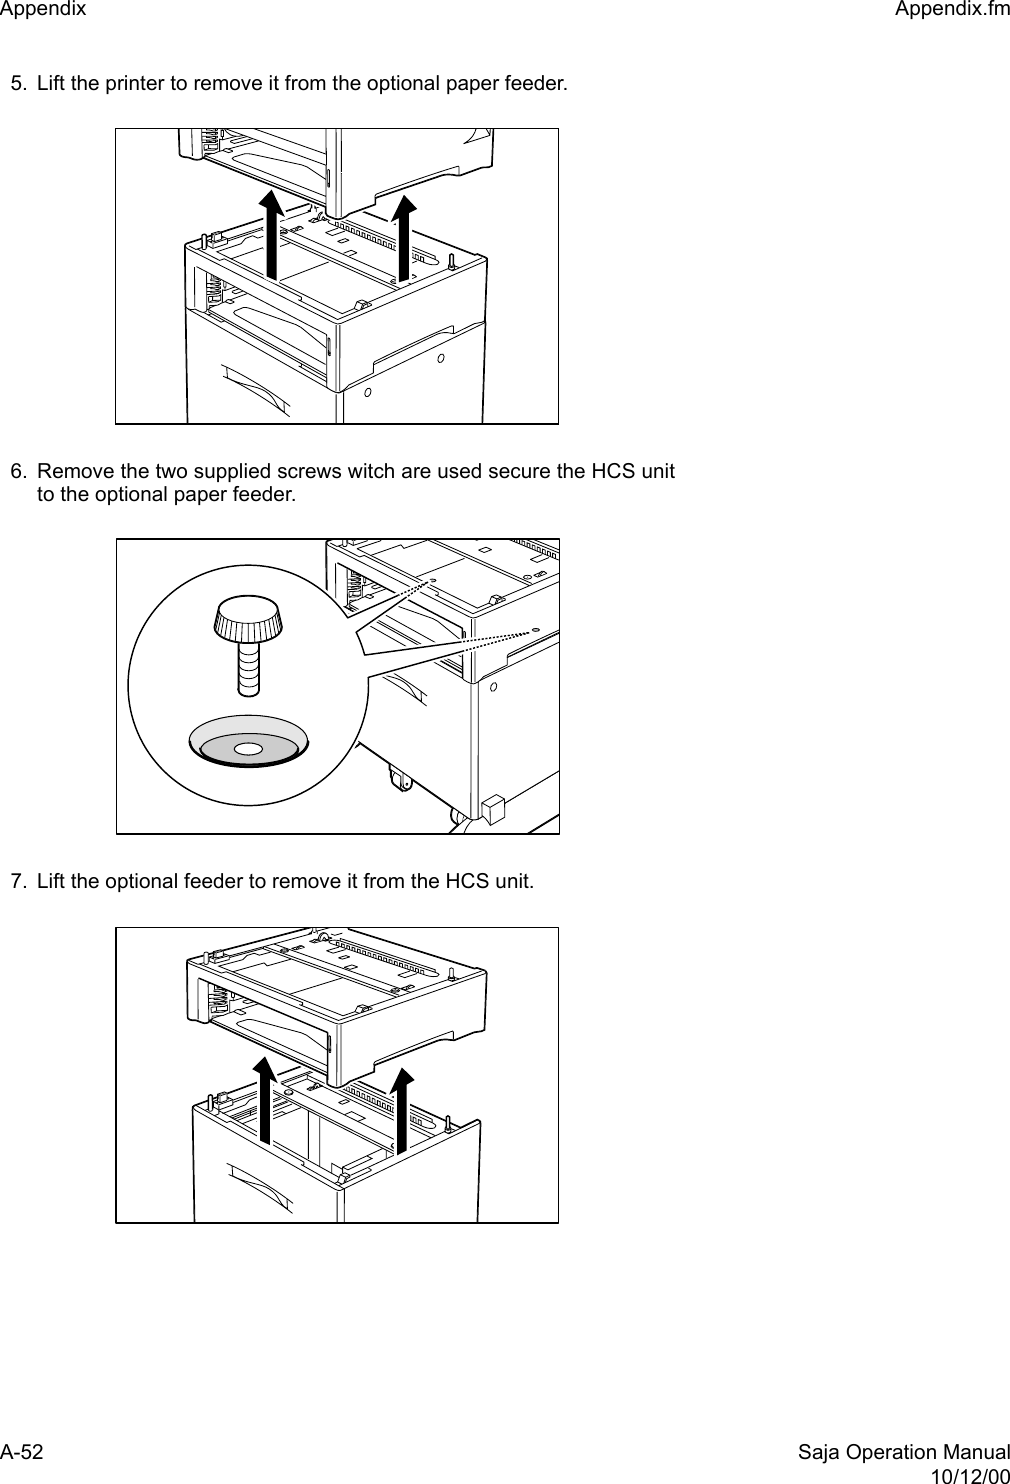 A-52 Saja Operation Manual10/12/00Appendix  Appendix.fm5. Lift the printer to remove it from the optional paper feeder.6. Remove the two supplied screws witch are used secure the HCS unitto the optional paper feeder.7. Lift the optional feeder to remove it from the HCS unit.